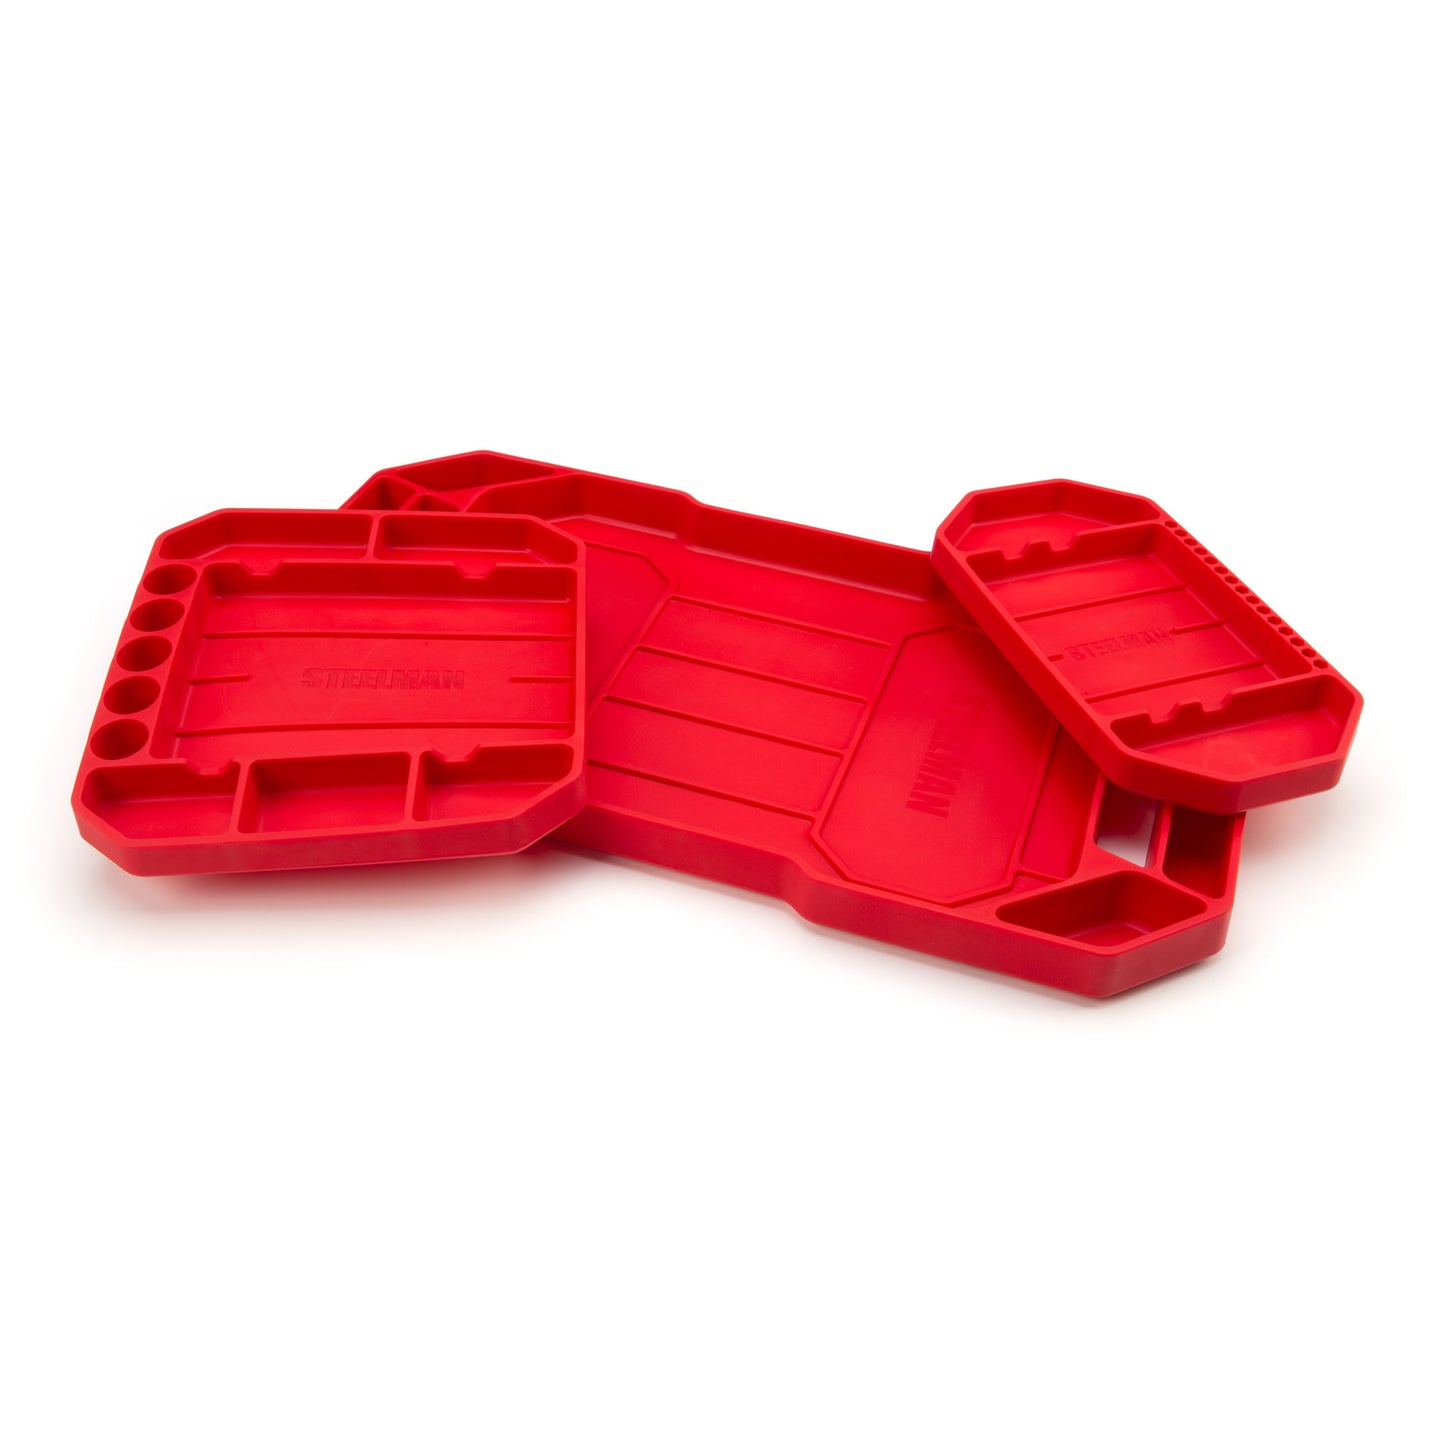 3-Piece Nesting Silicone Tool and Hobby Tray Set